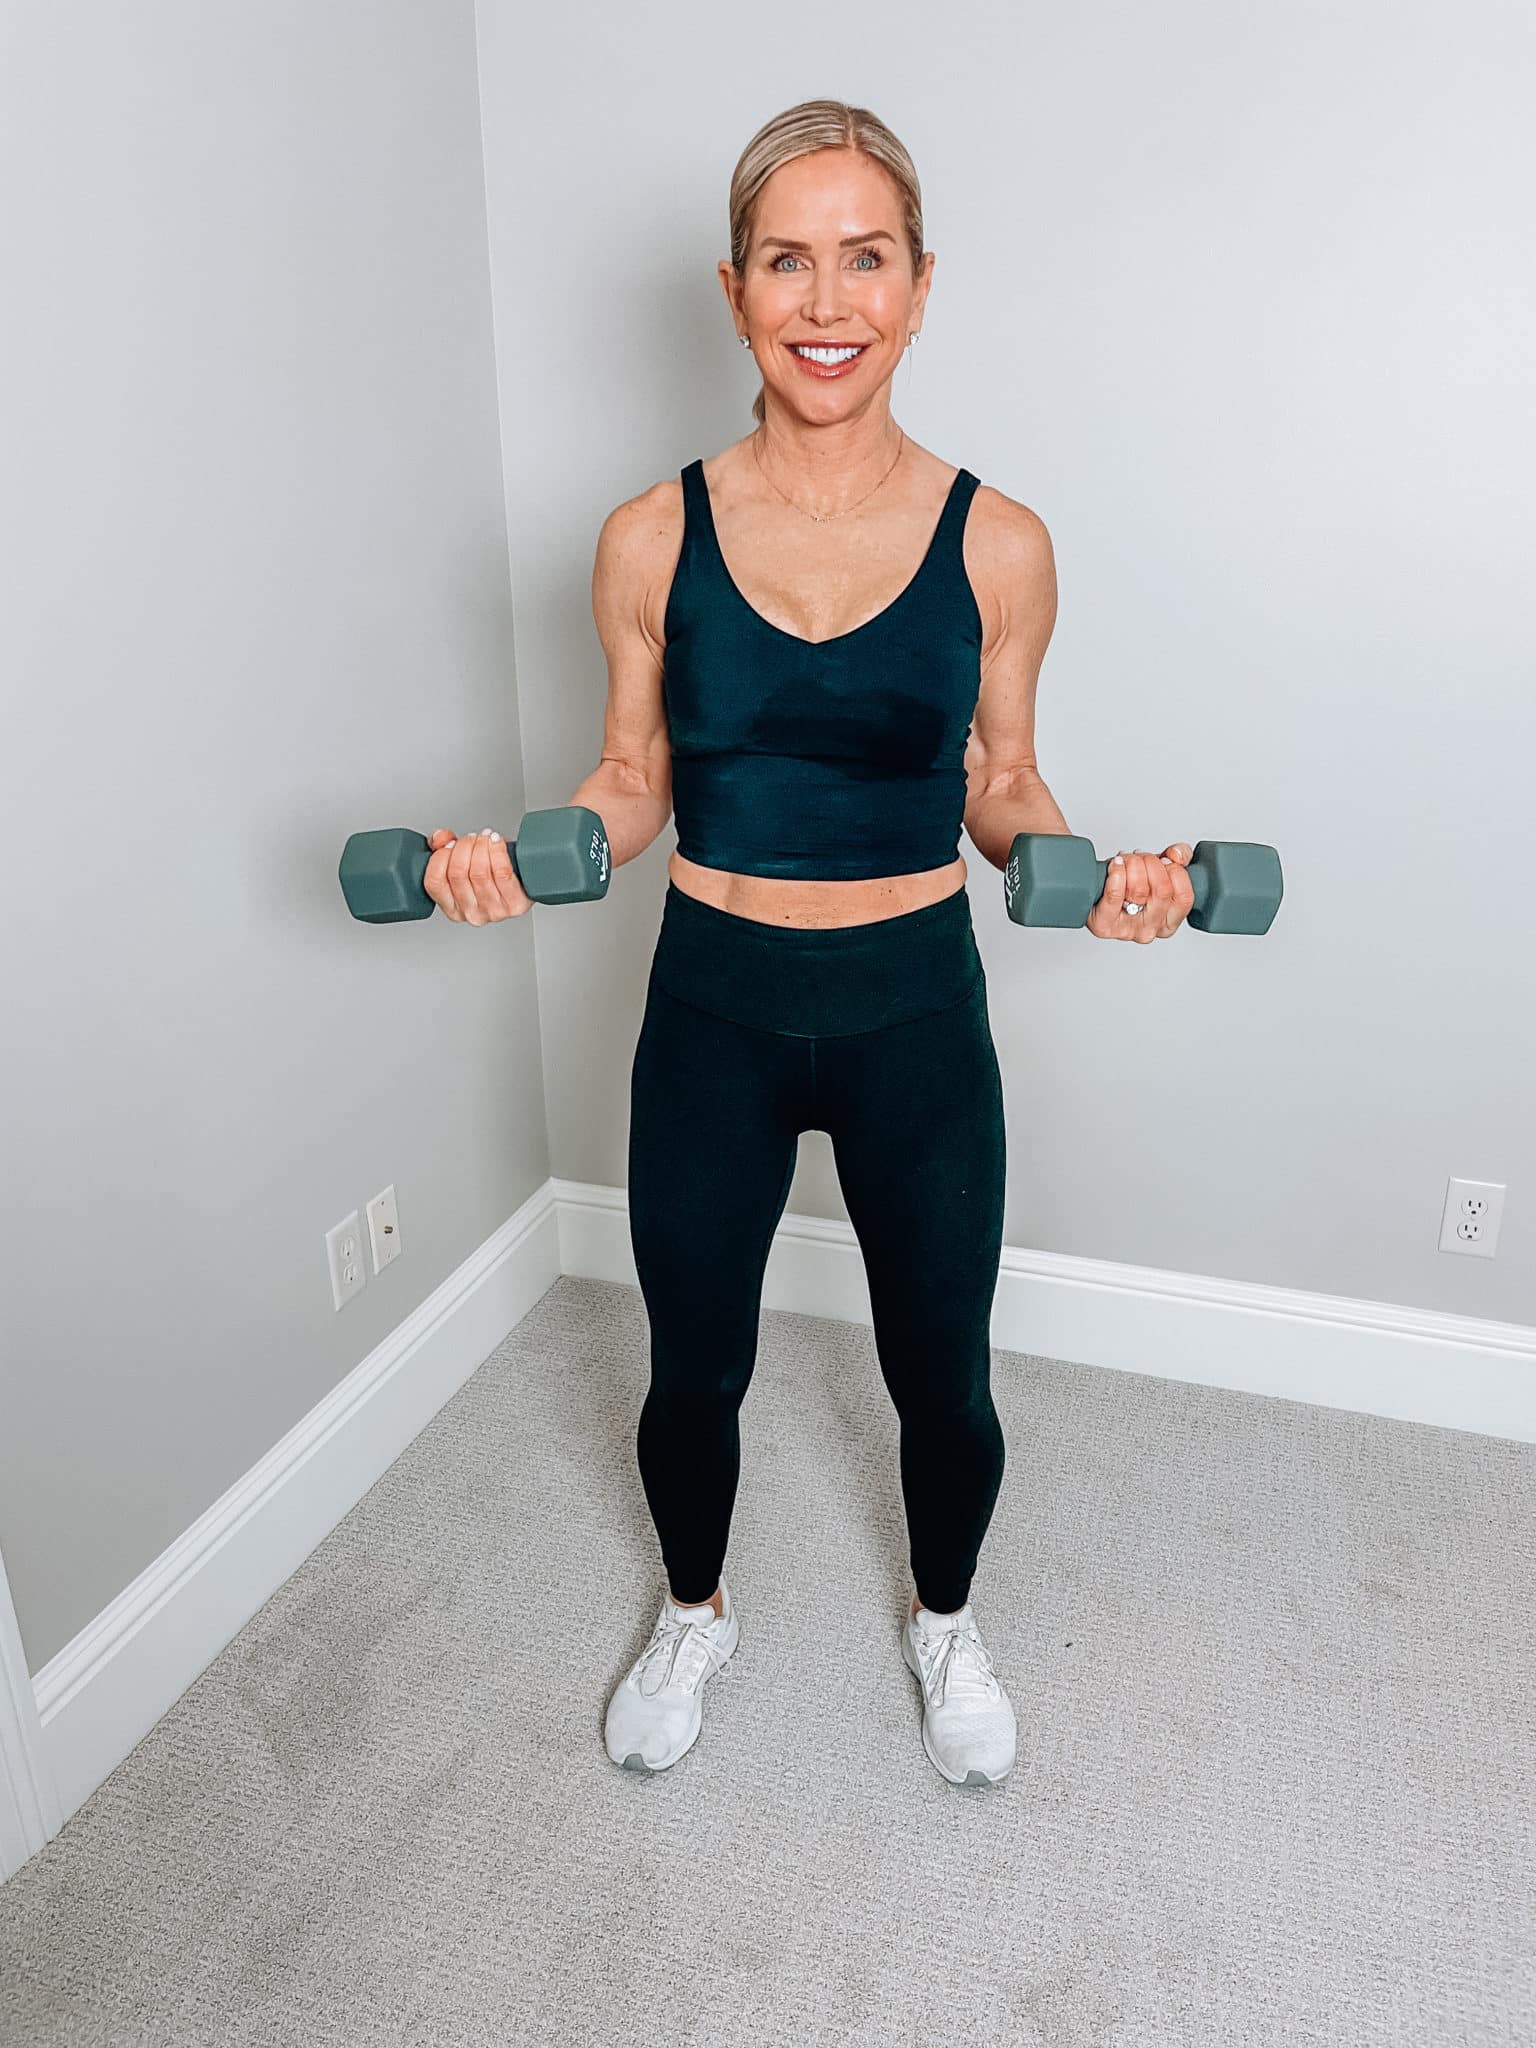 Chris Freytag wearing a black crop top with black leggings holding a pair of grey 10 lb dumbbells.